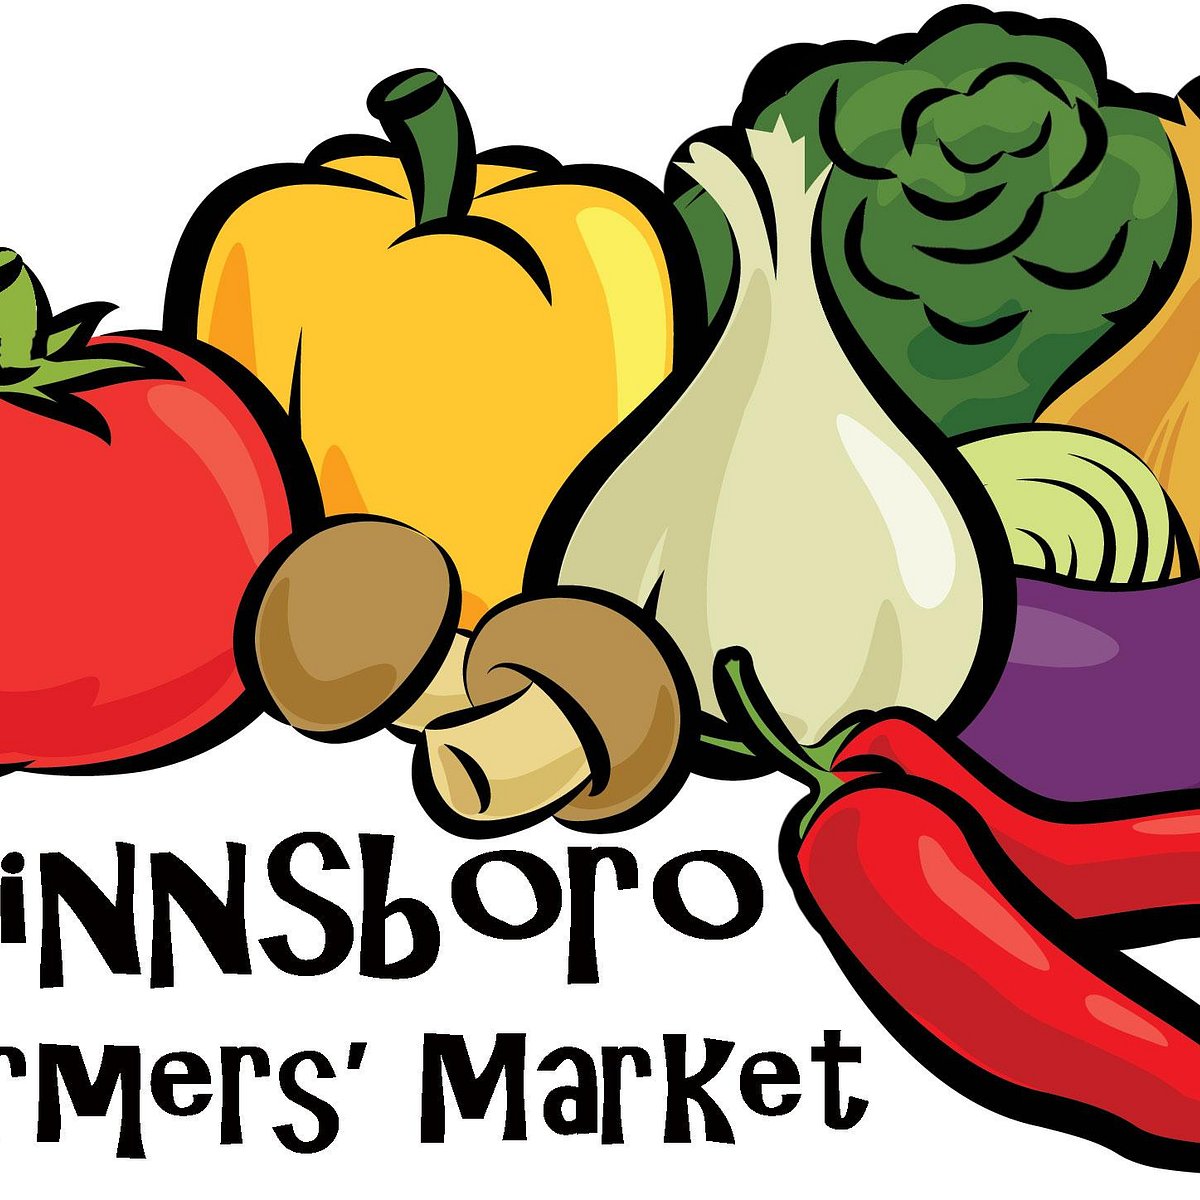 WINNSBORO FARMERS' MARKET - All You Need to Know BEFORE You Go